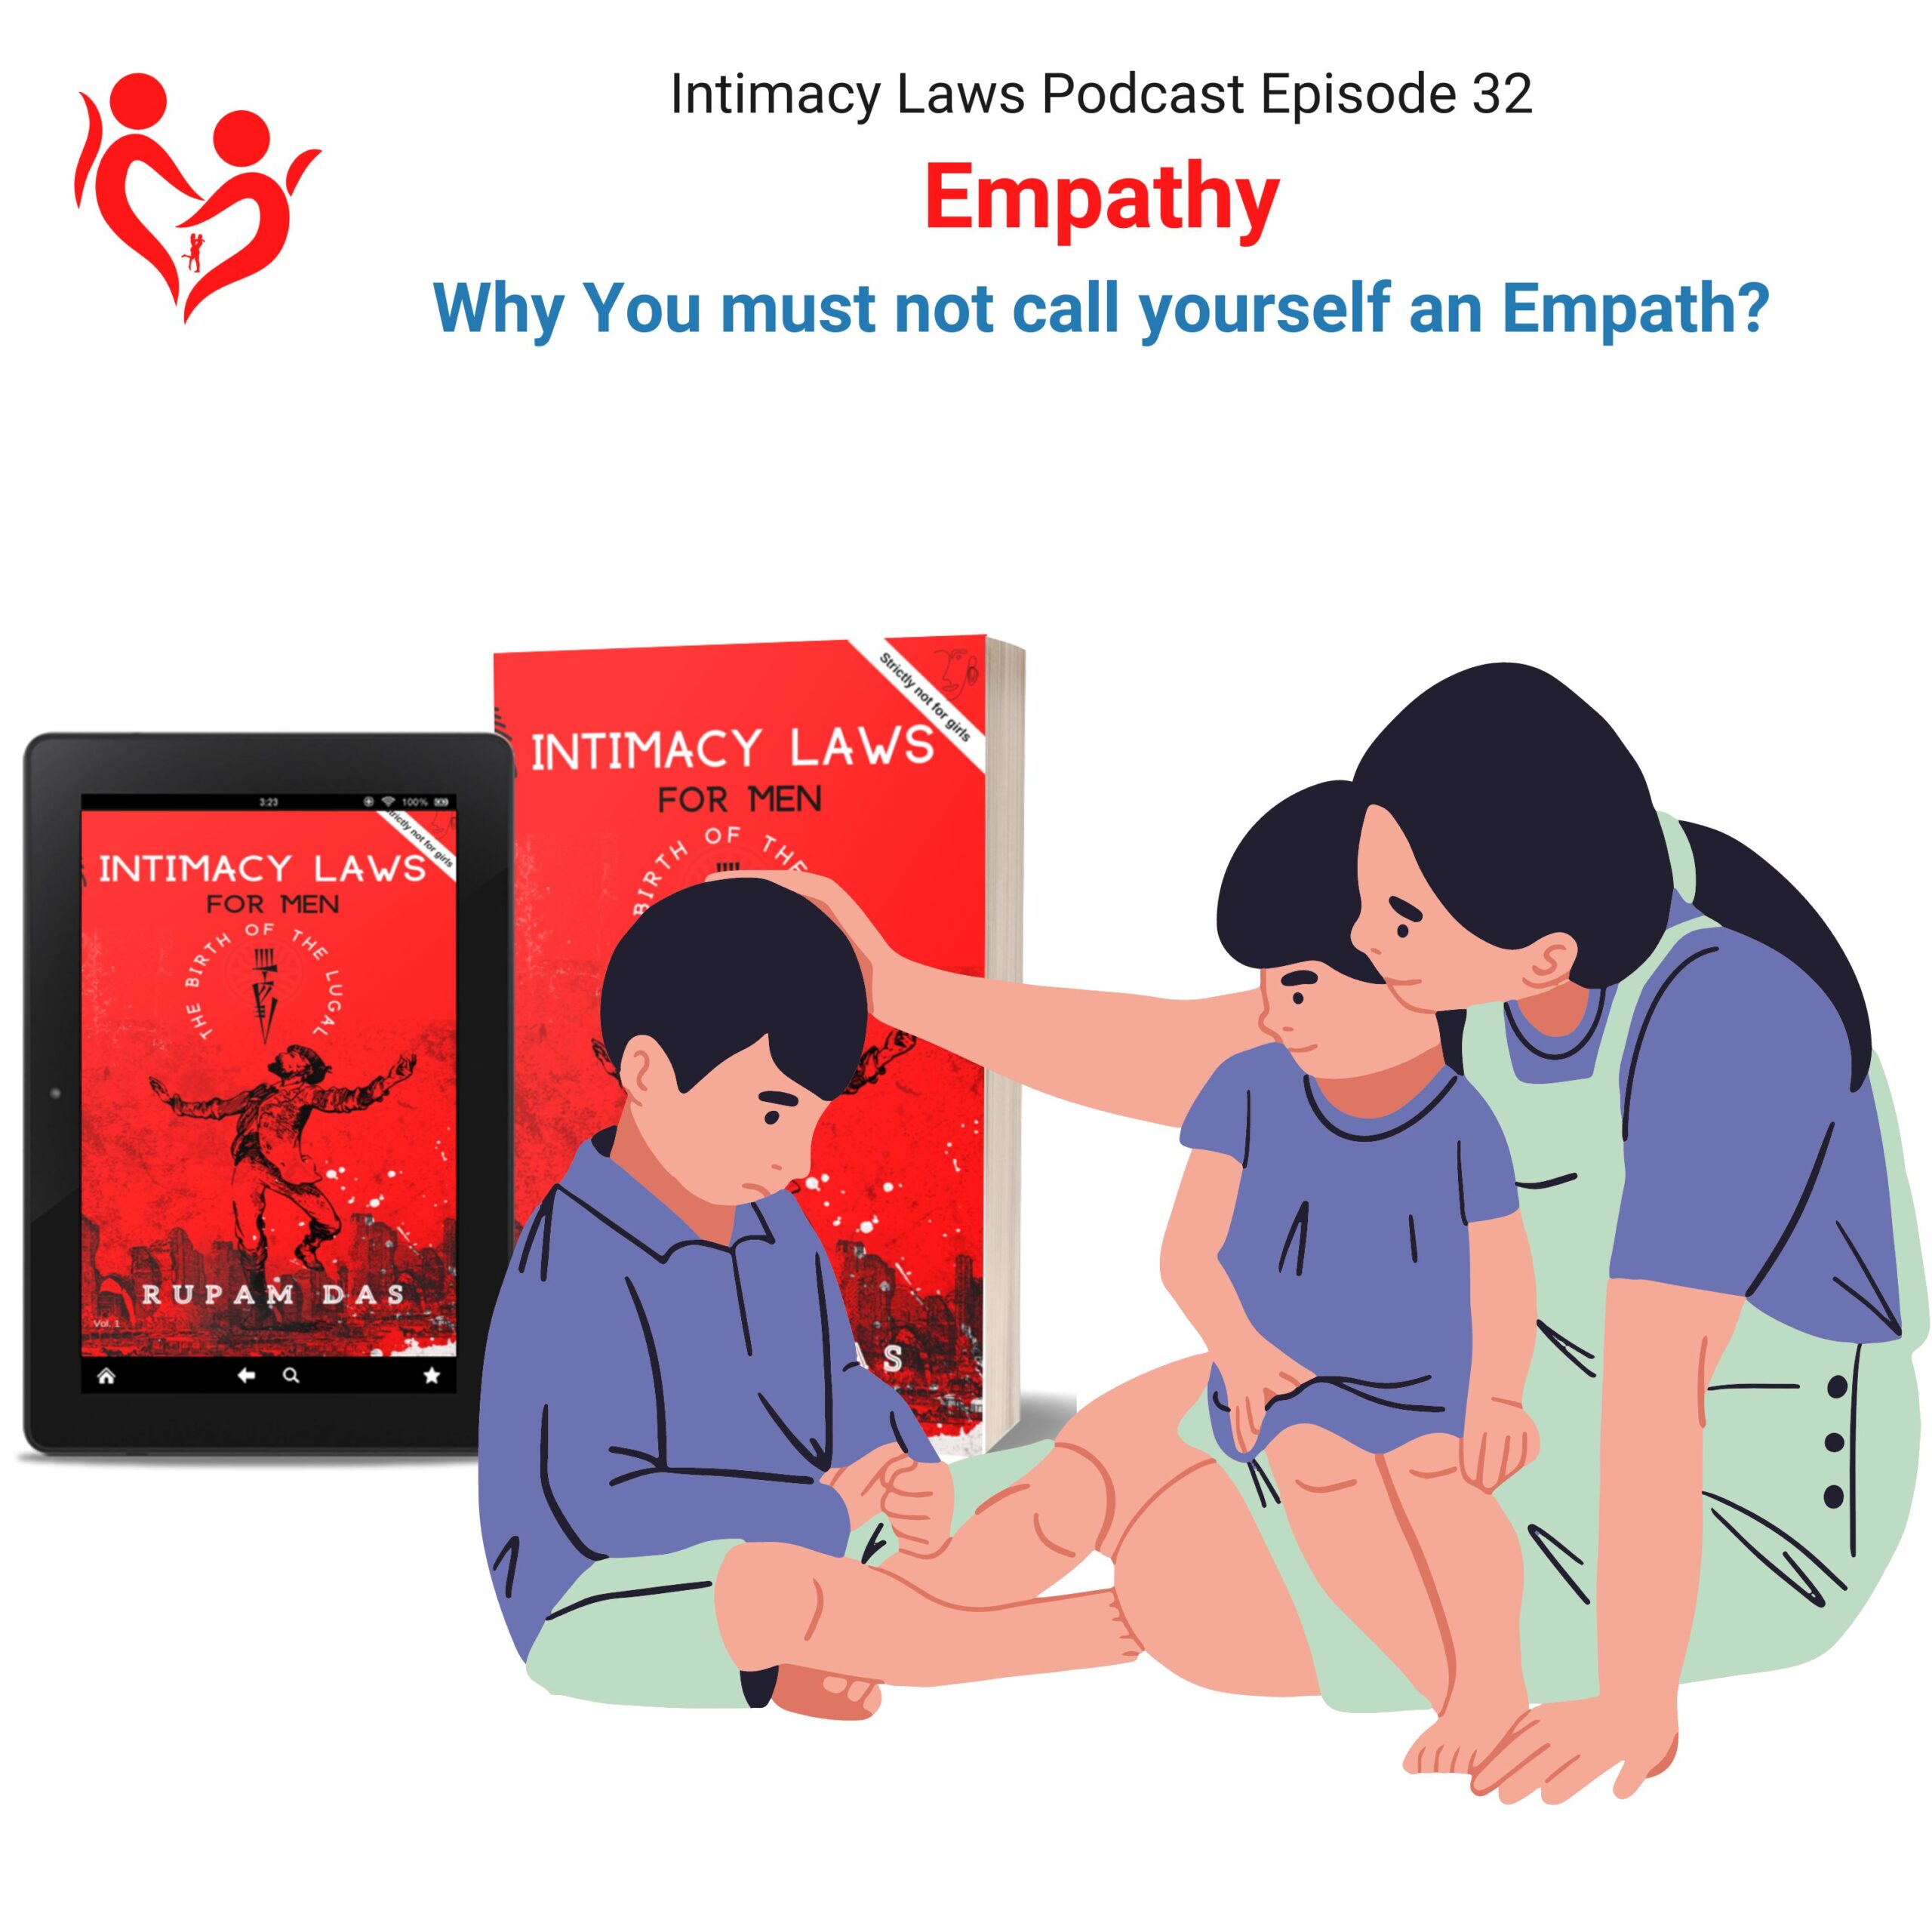 Intimacy Laws Podcast Episode 32 Empathy